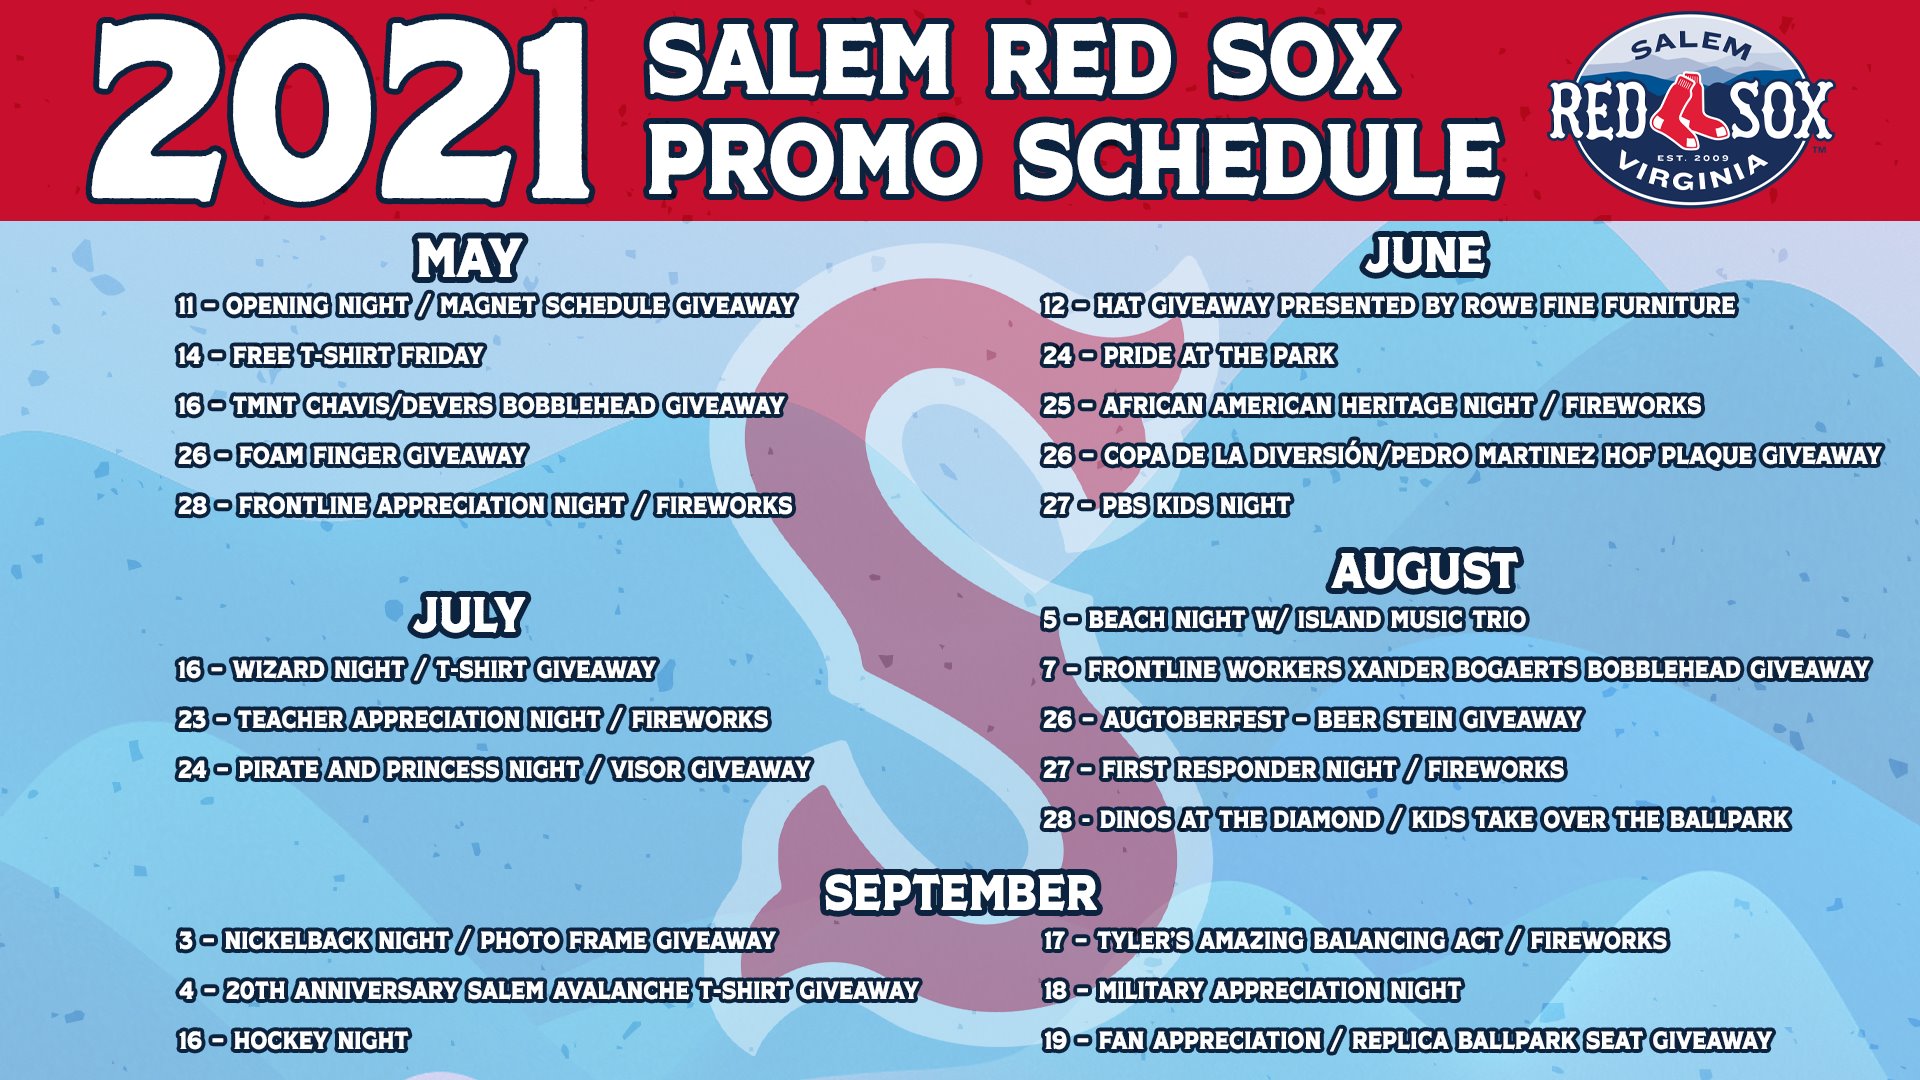 Red Sox promotions to watch out for this season